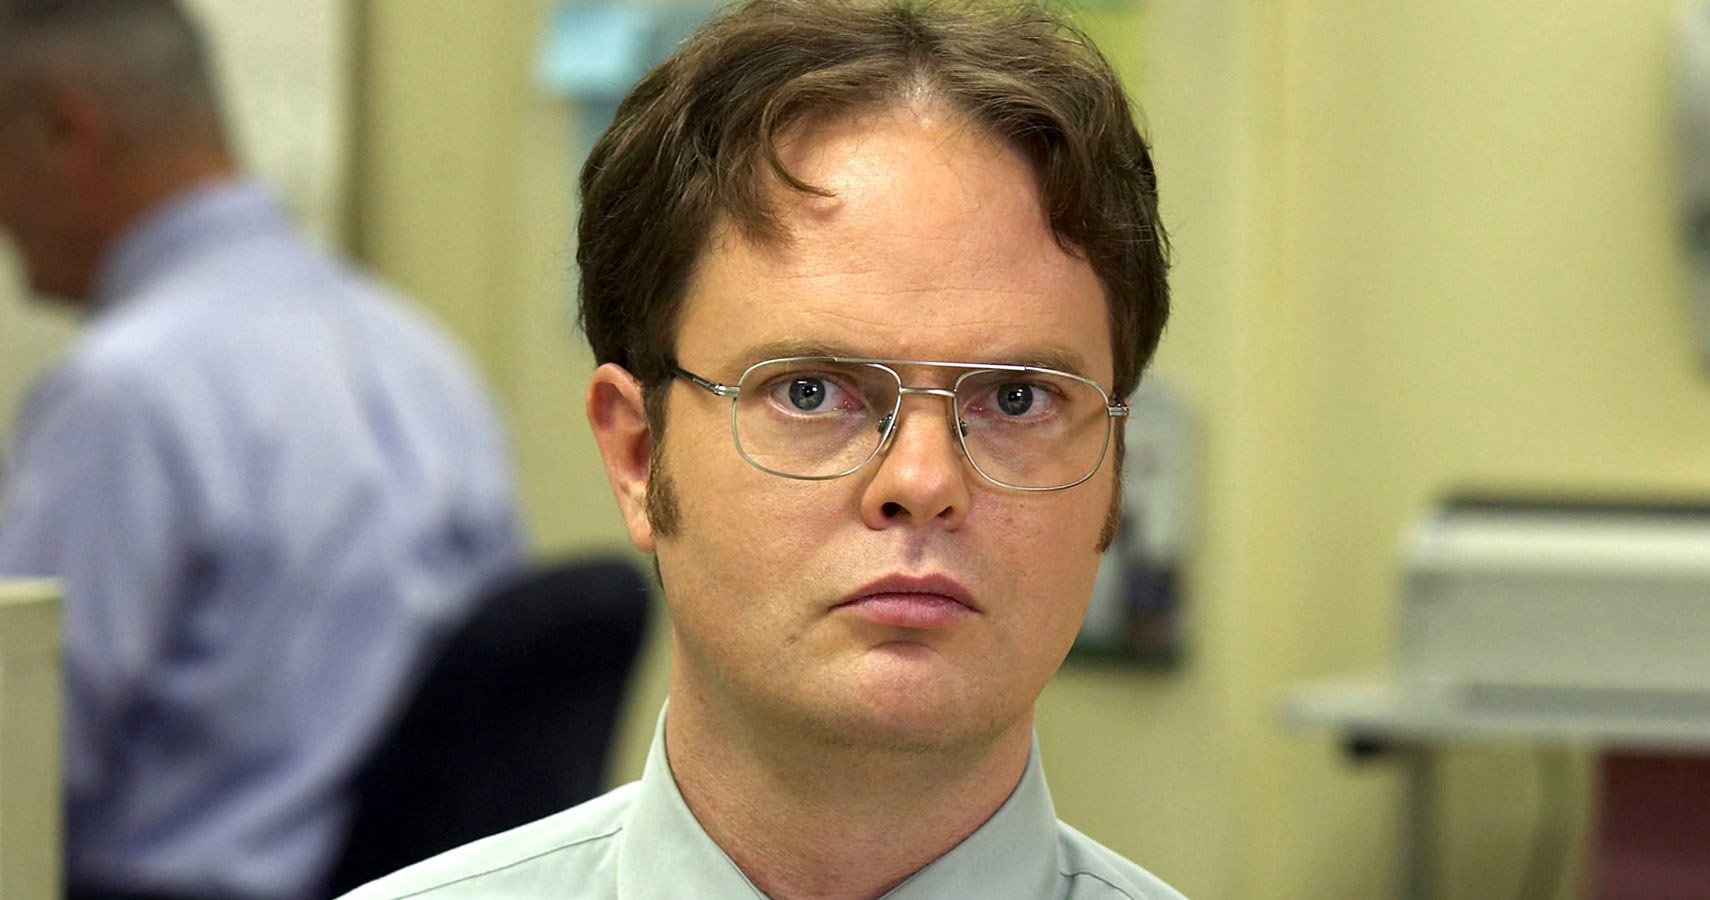 Rainn Wilson to receive Comedy Impact Award at JFL Awards Show in Montreal on July 28